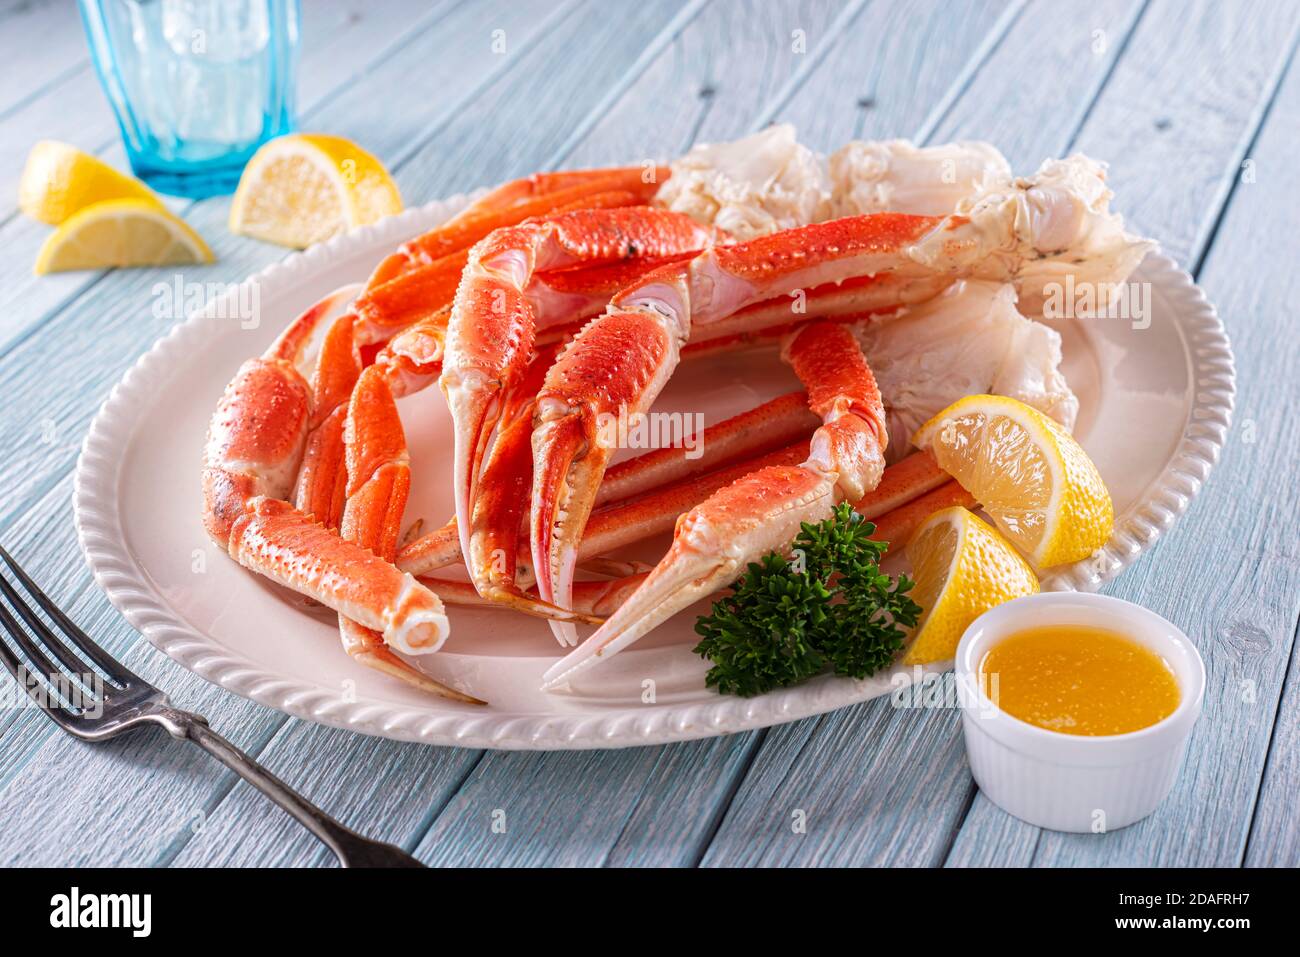 A plate of delicious snow crab leg clusters with lemon, parsley and melted butter. Stock Photo